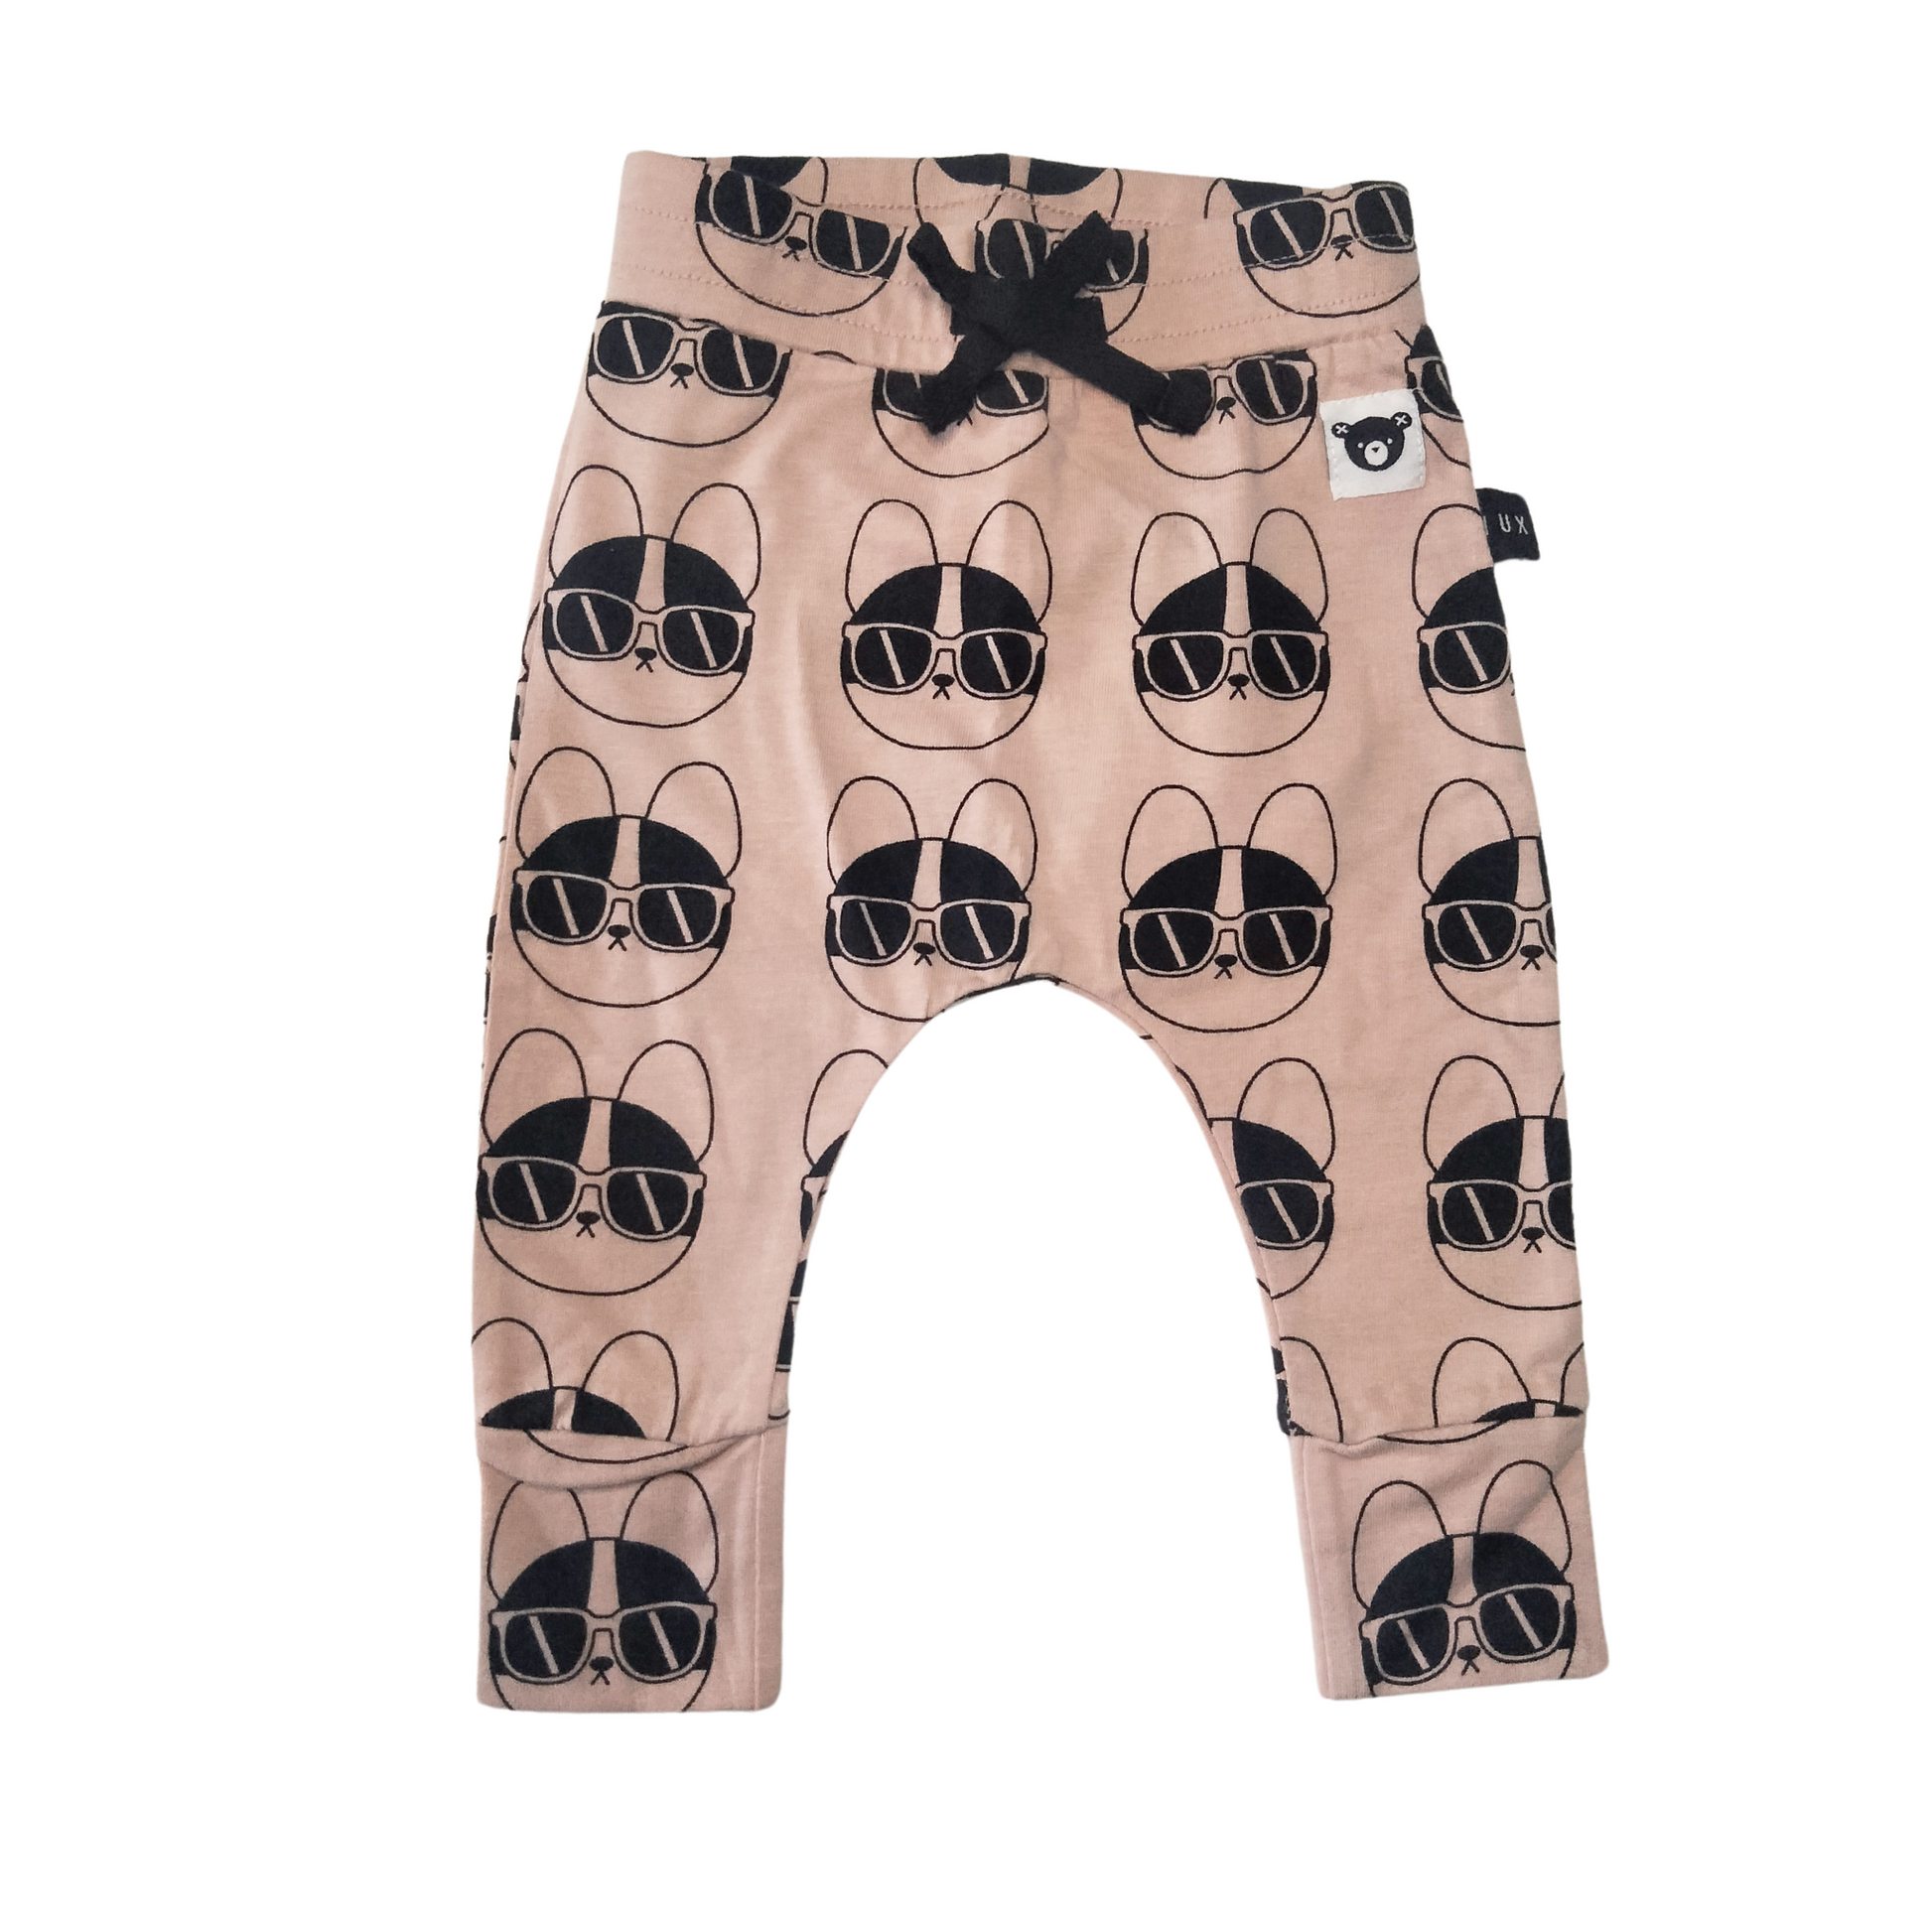 HUXBABY Pants - Sunglasses - New - OnChicBabyClothes